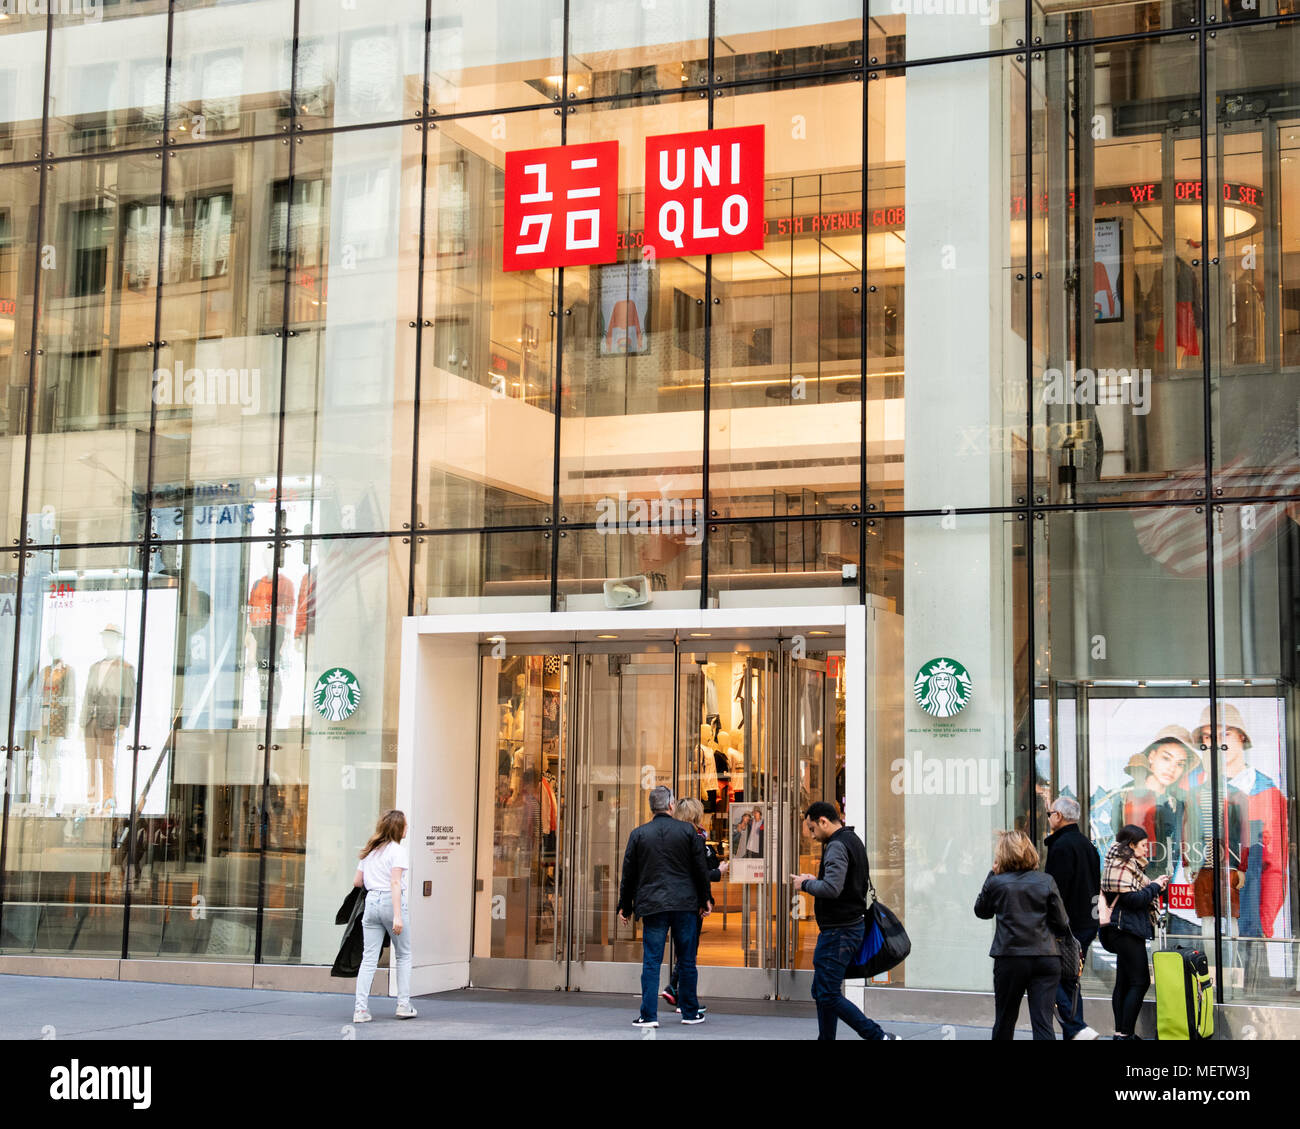 List 92+ Images uniqlo fifth avenue store photos Completed